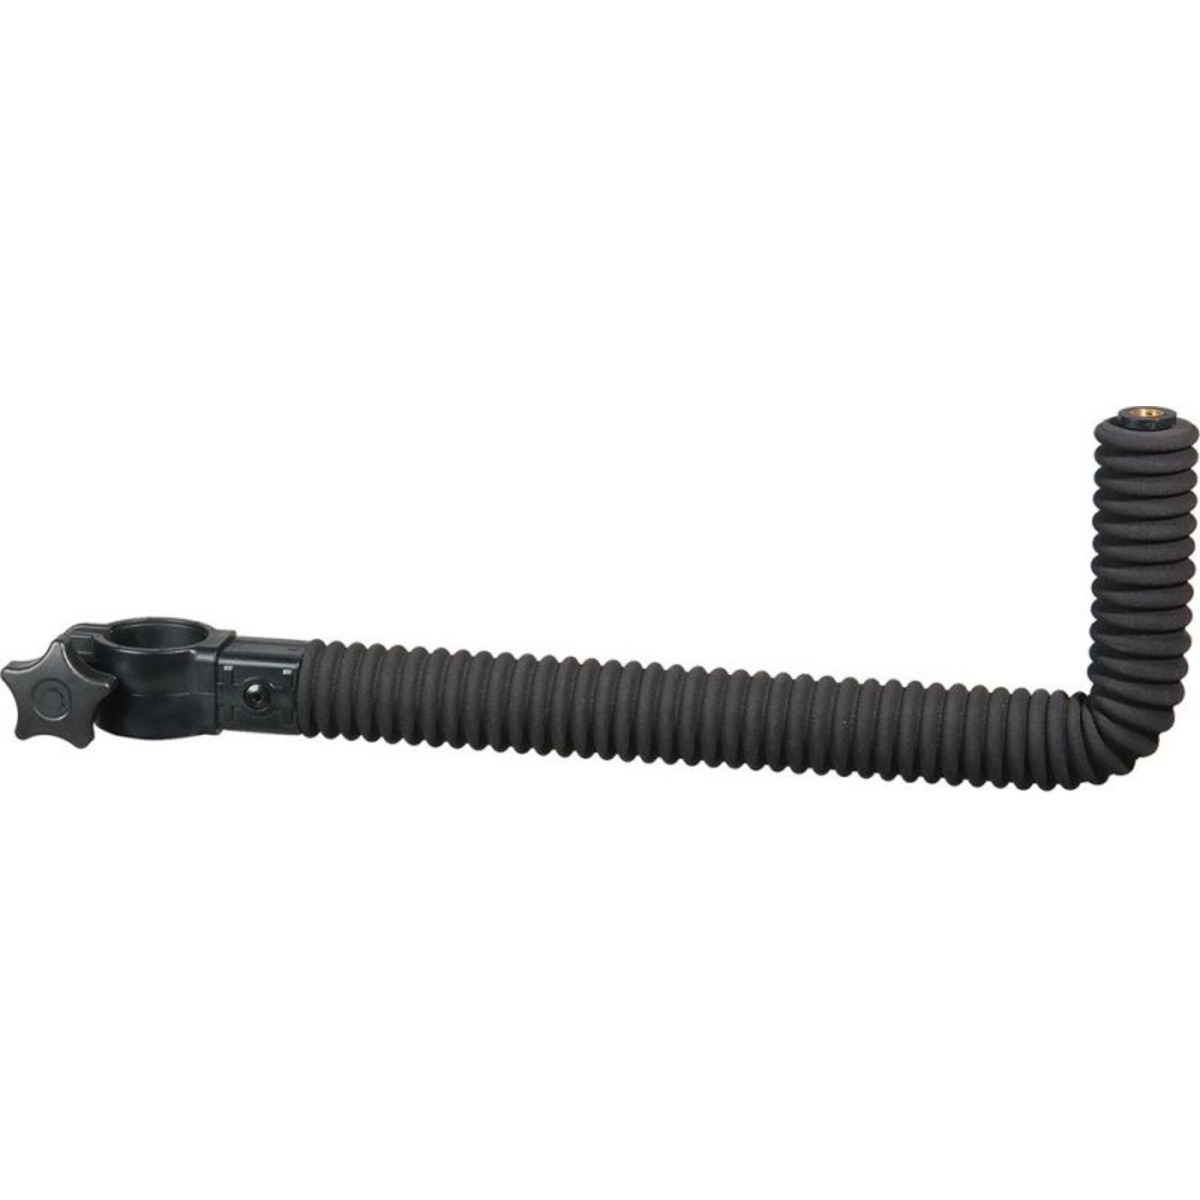 Trabucco Gnt-X36 Ripple Cross Arm -  Supporto Laterale a L  - Long        